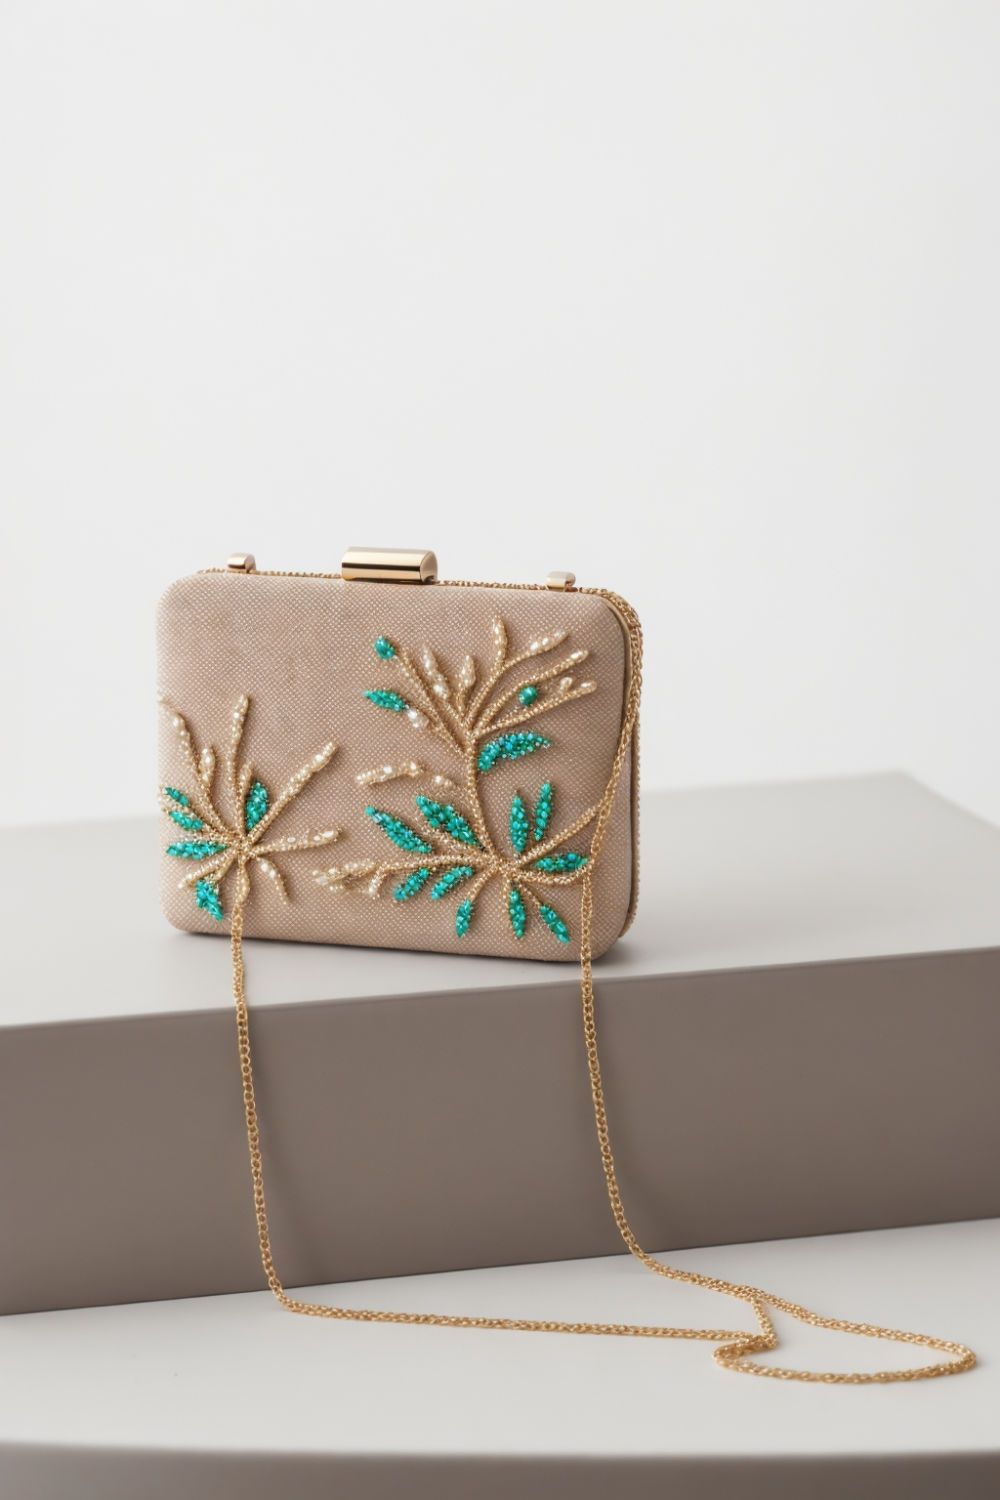 embellished clutch for new years outfit